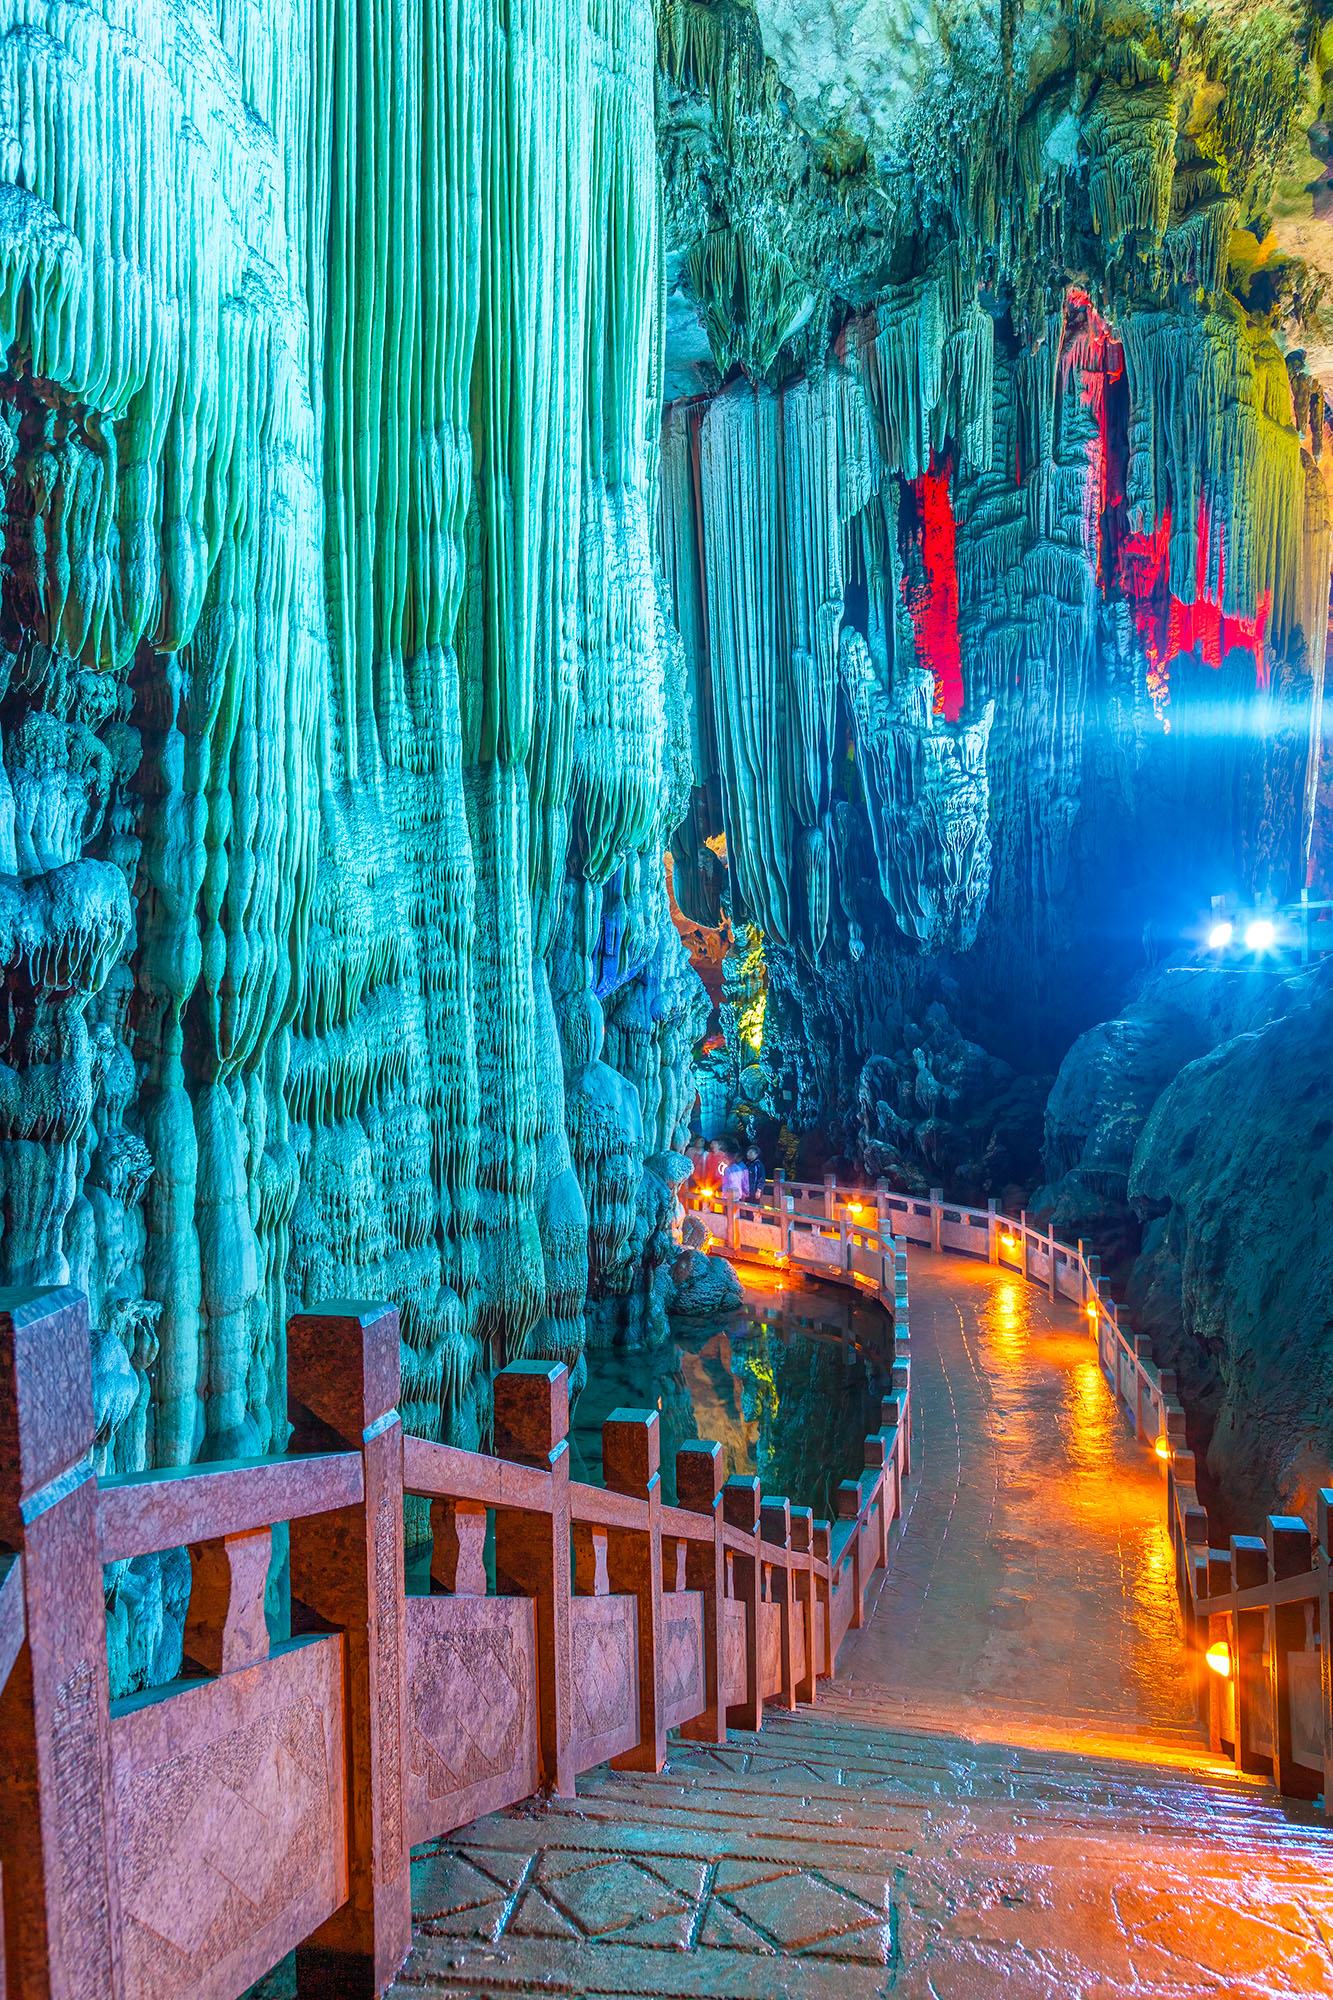 Inside China's Reed Flute Cave, my path led deeper into the subterranean realm. The photograph captures a striking display of...